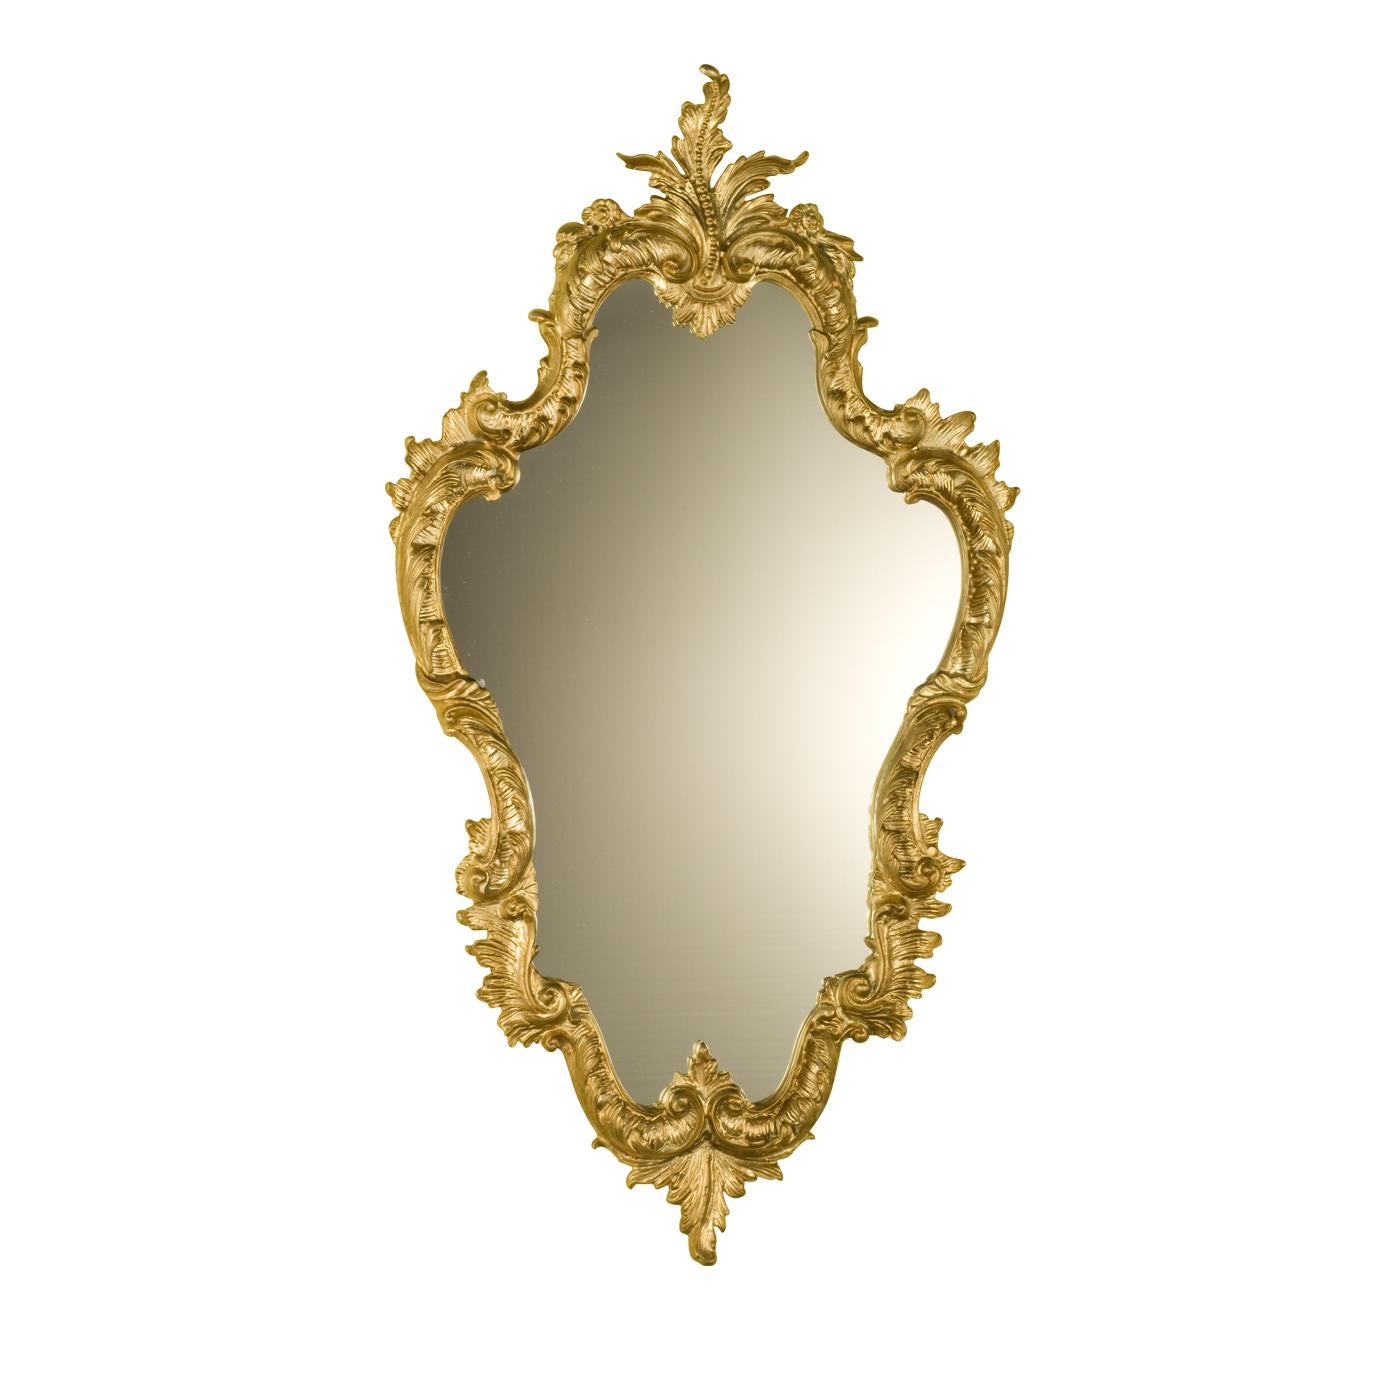 This exquisite mirror is one of the most distinctive representations of the Florentine artistic production of furniture and will make a statement in any room, particularly as a striking entry mirror, or above a mantelpiece in the living room. The